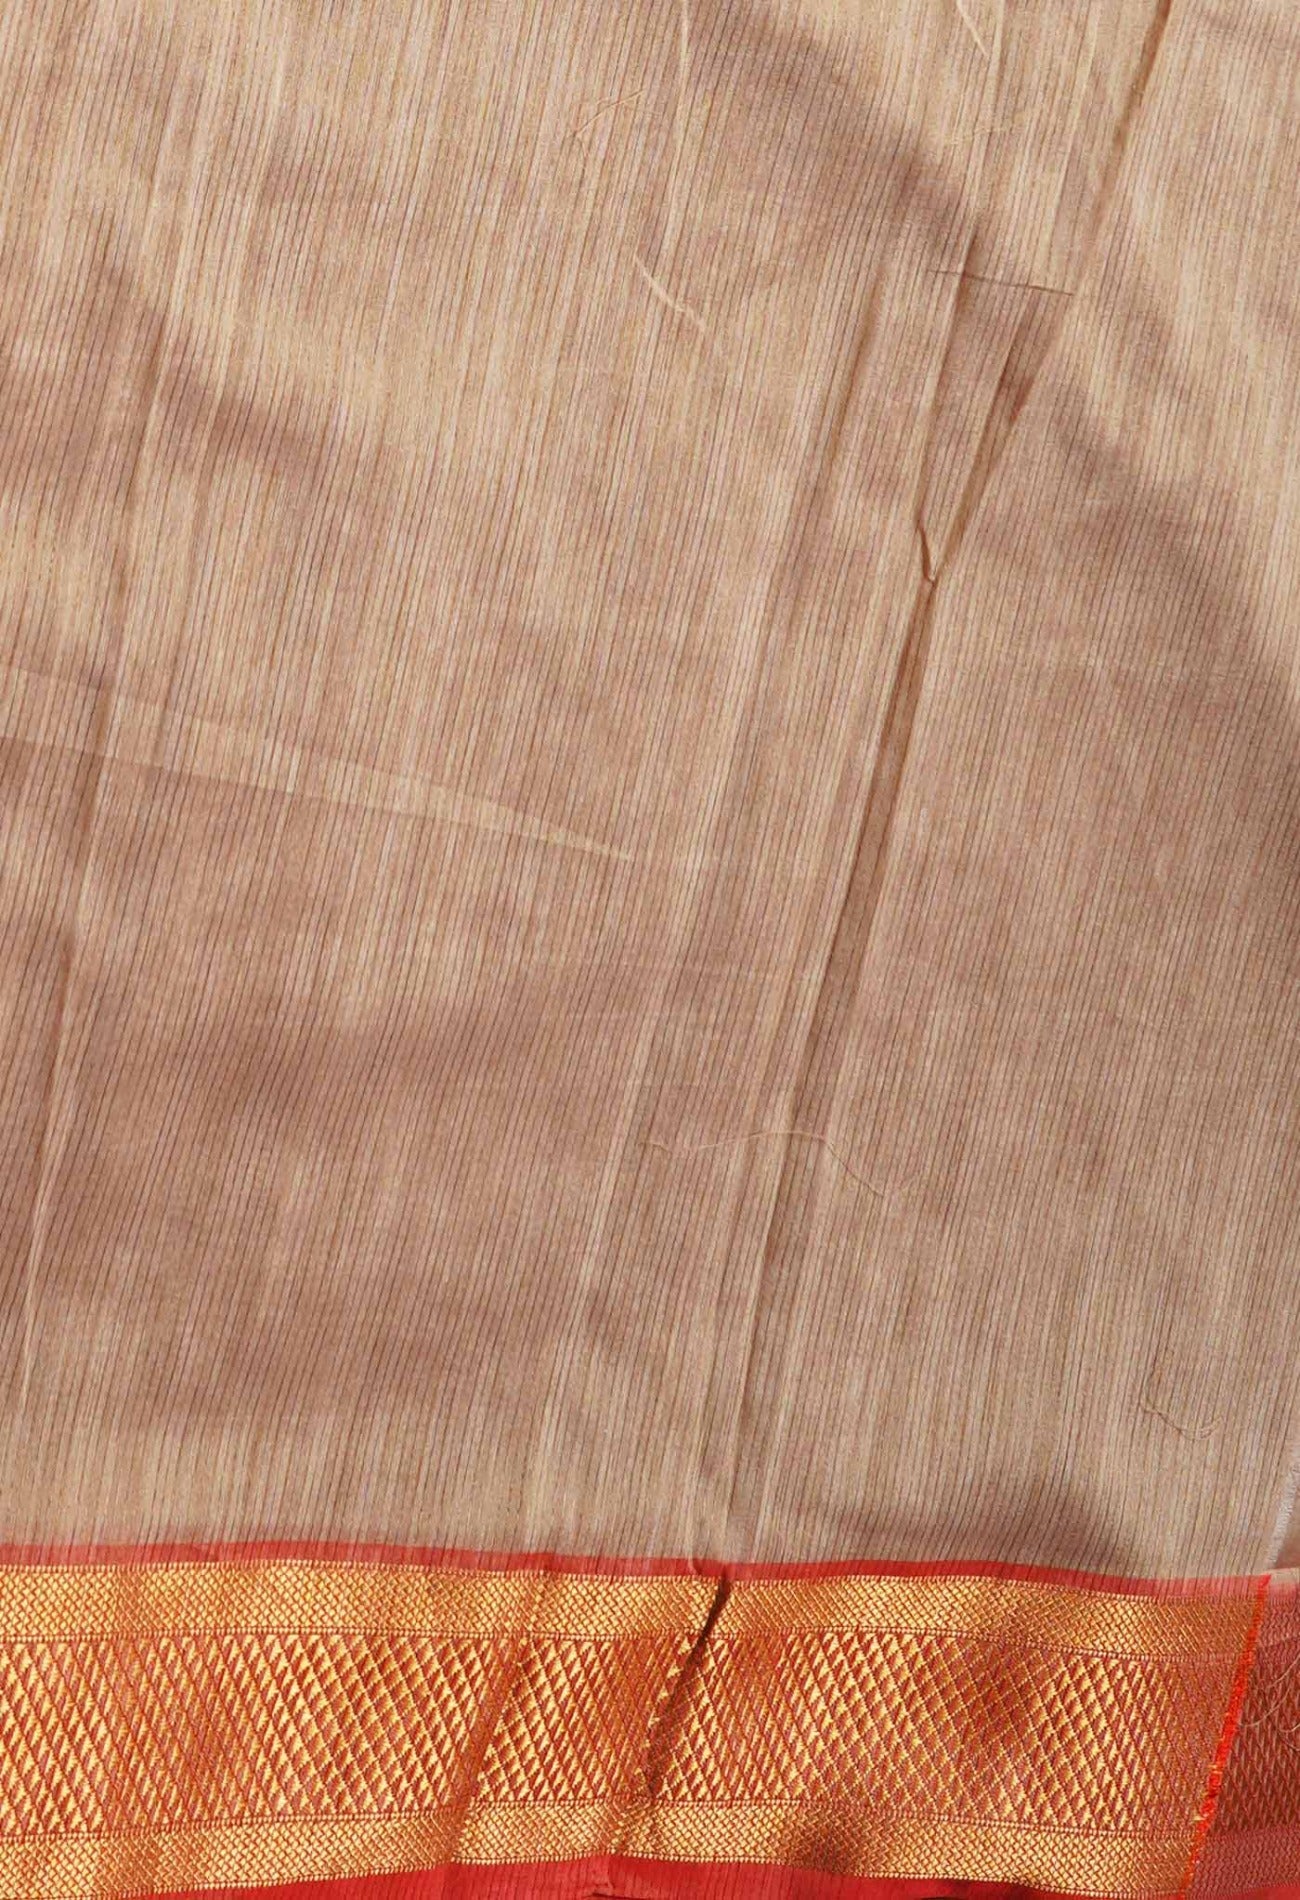 Online Shopping for Brown  Maheshwari Jute Sico Saree with Cross Stitched Embroidery with Embroidery from Madhya Pradesh at Unnatisilks.com India
